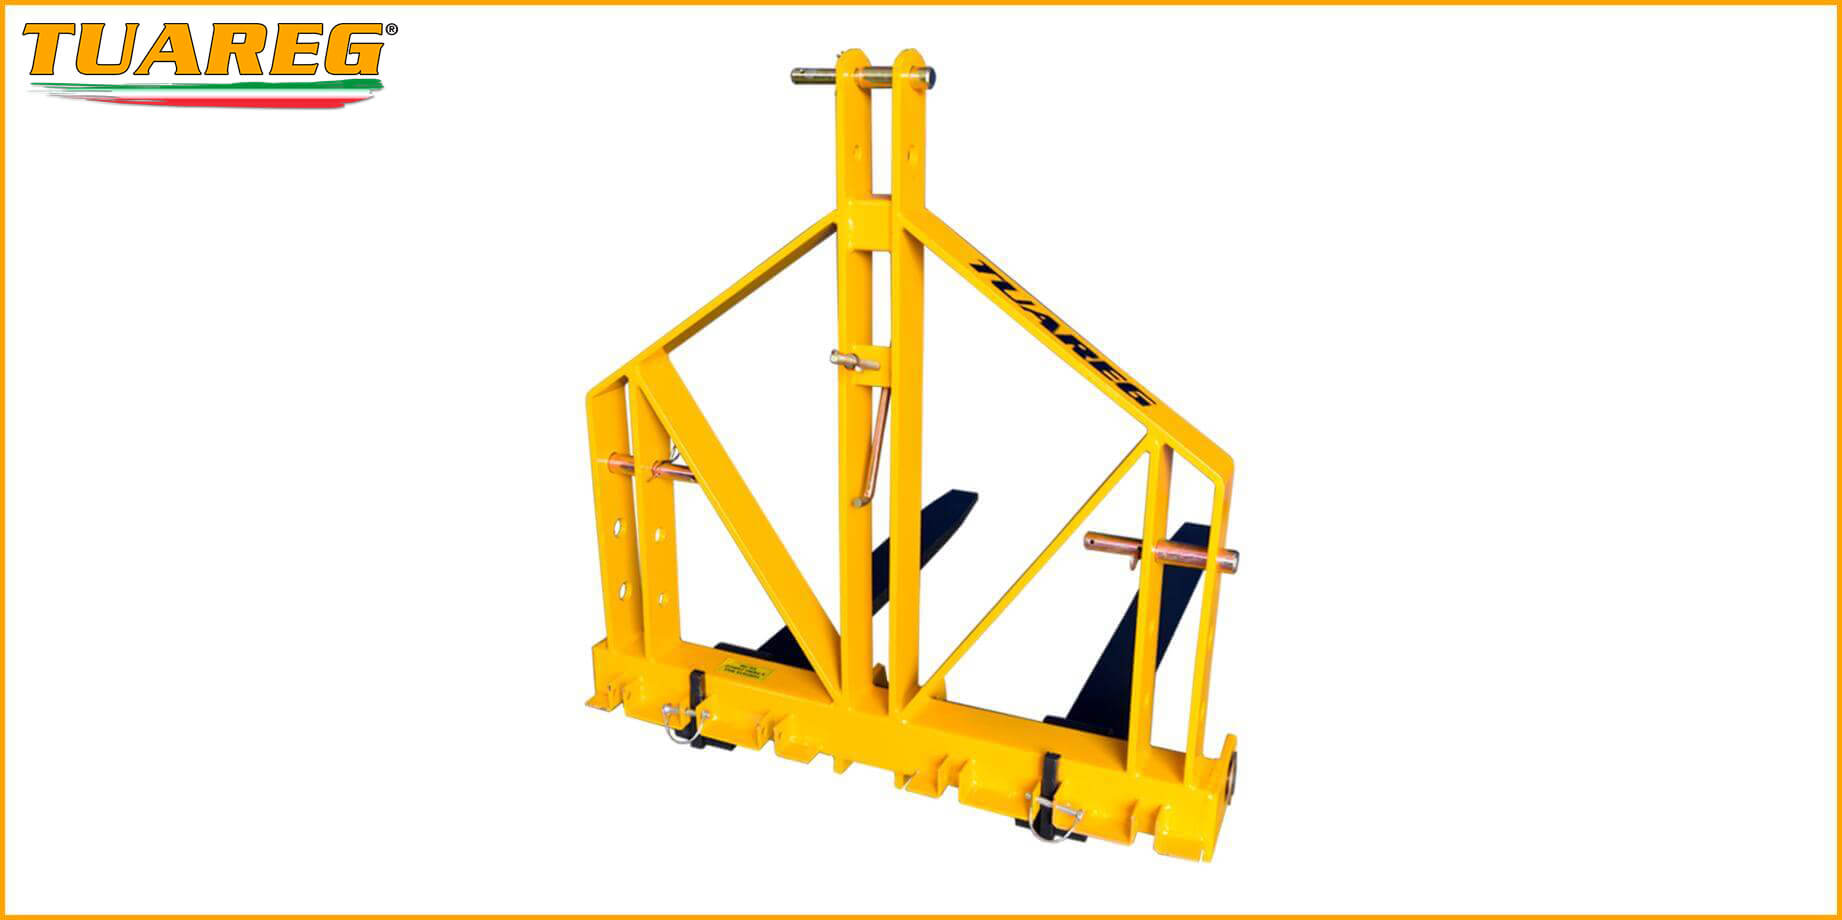 Forklift - Tuareg - Tractor towed equipment for beach cleaning